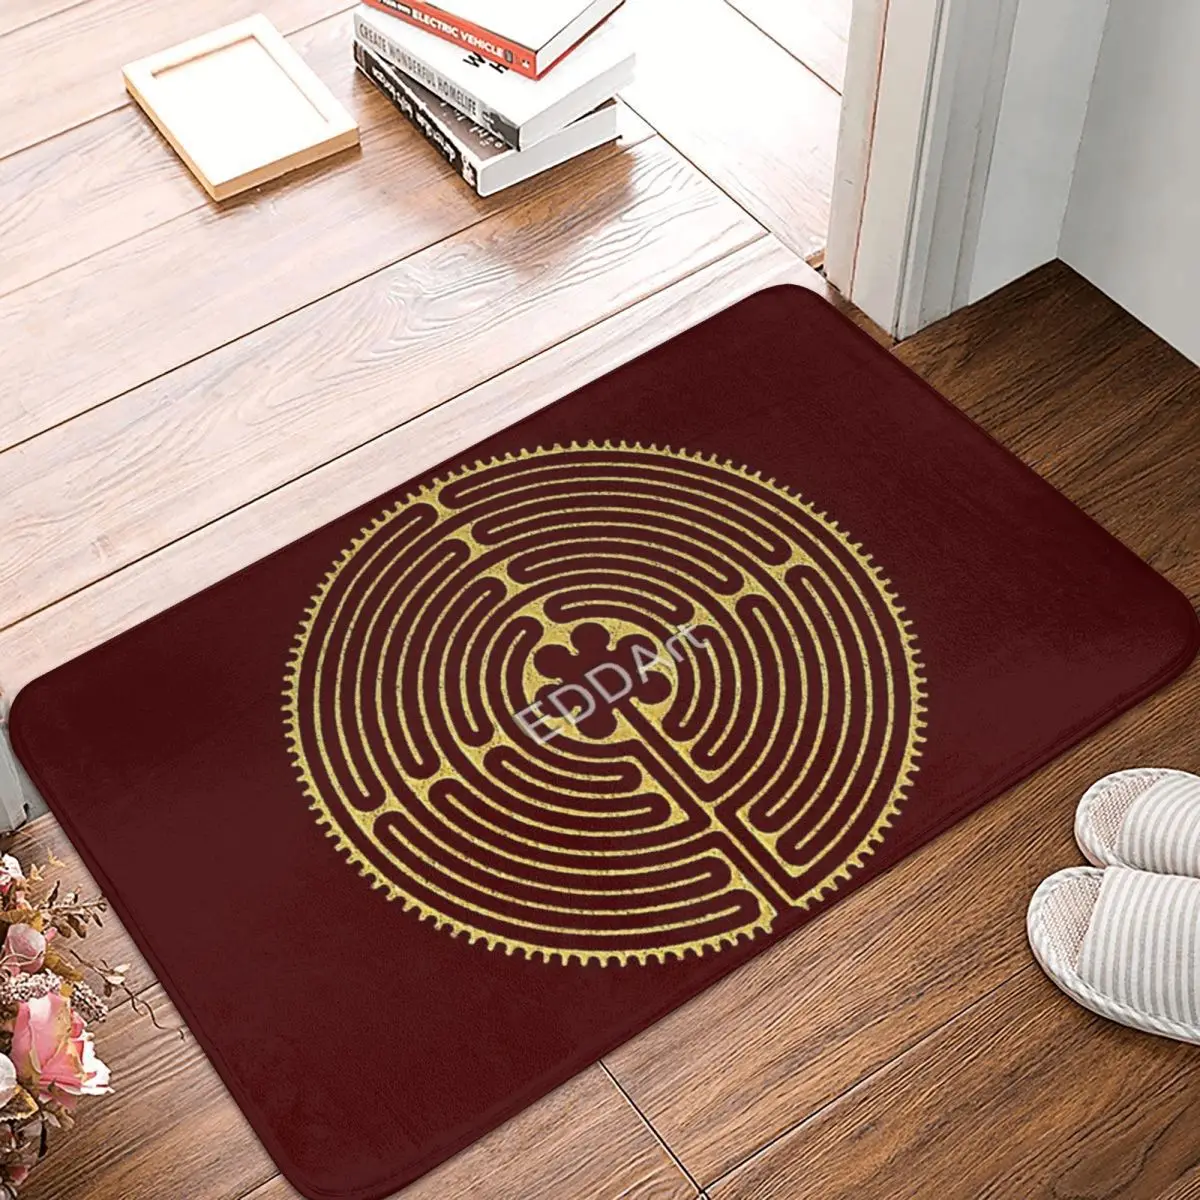 

Sacred Geometry Symbol - Chartres Labyrinth 60x40cm Carpet Polyester Floor Mats Cute Style Doorway Everyday